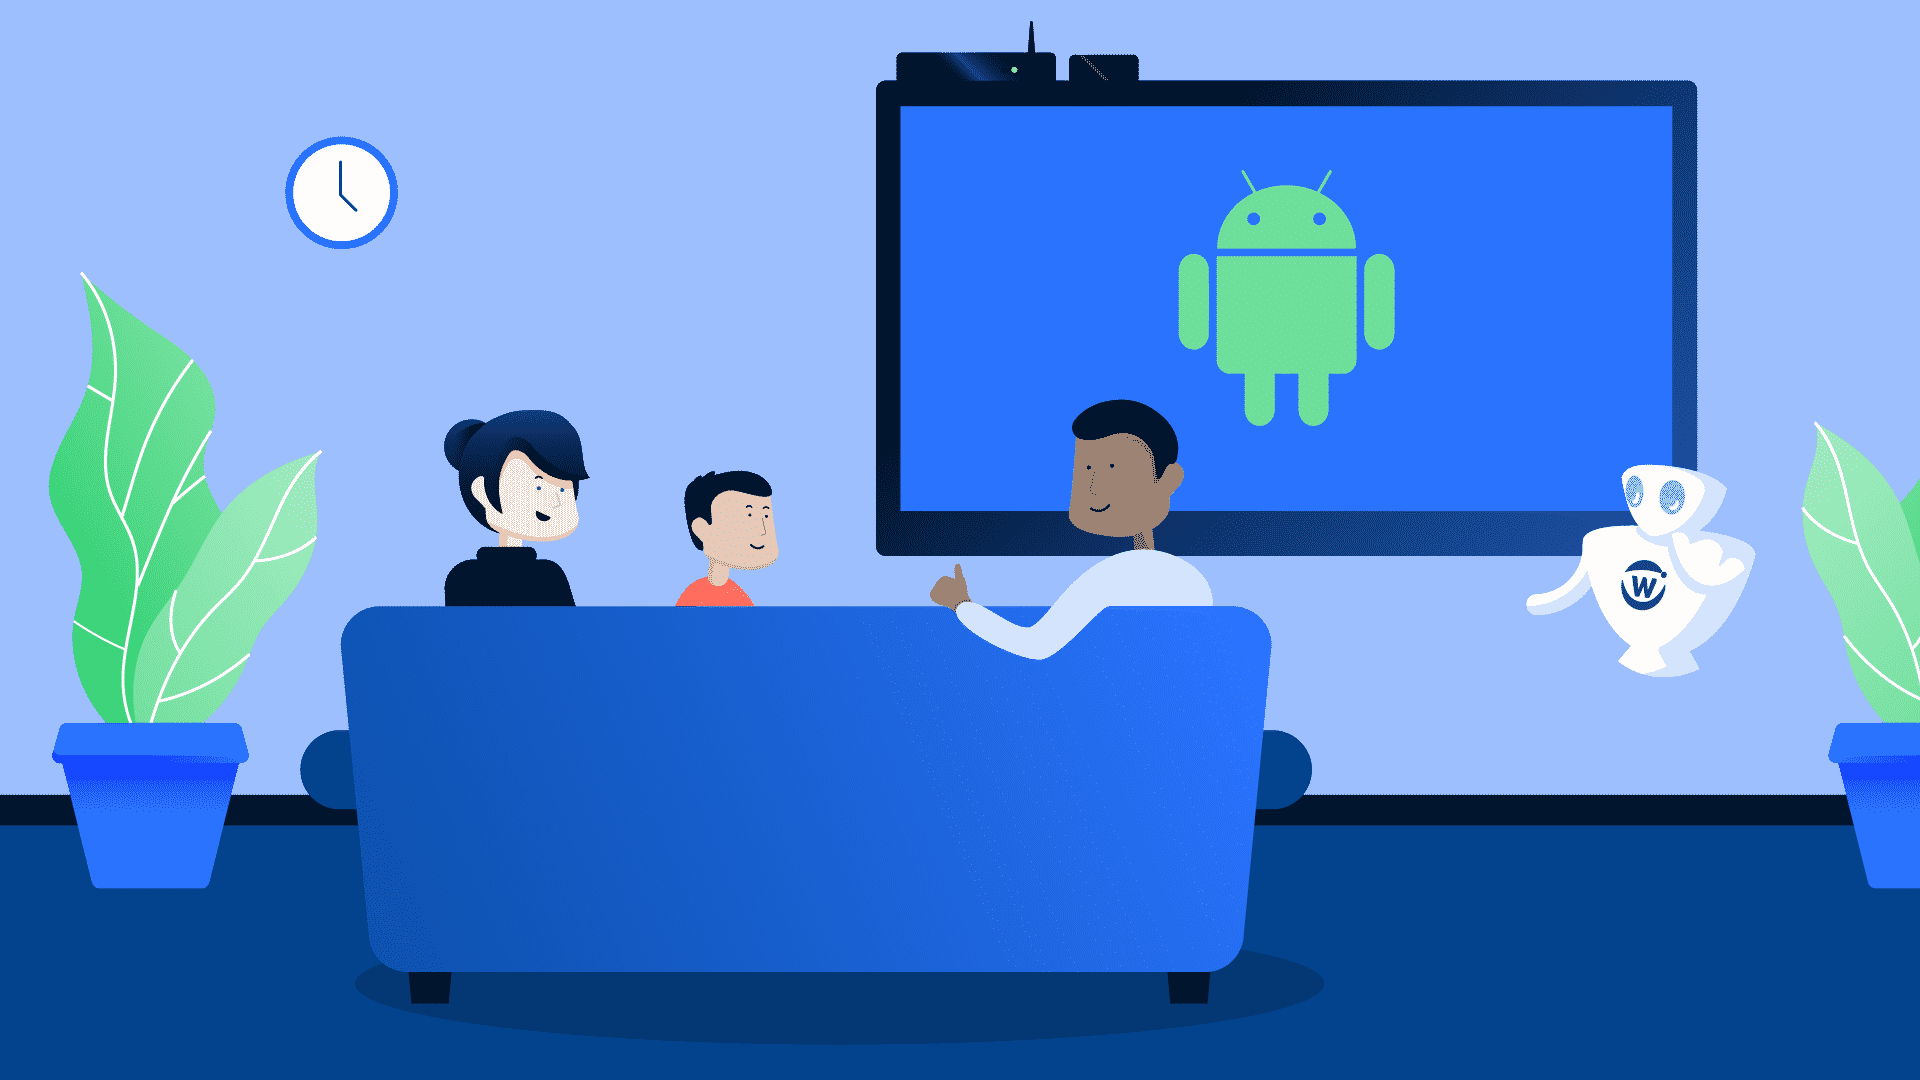 Why is Android TV test automation so important in 2022?